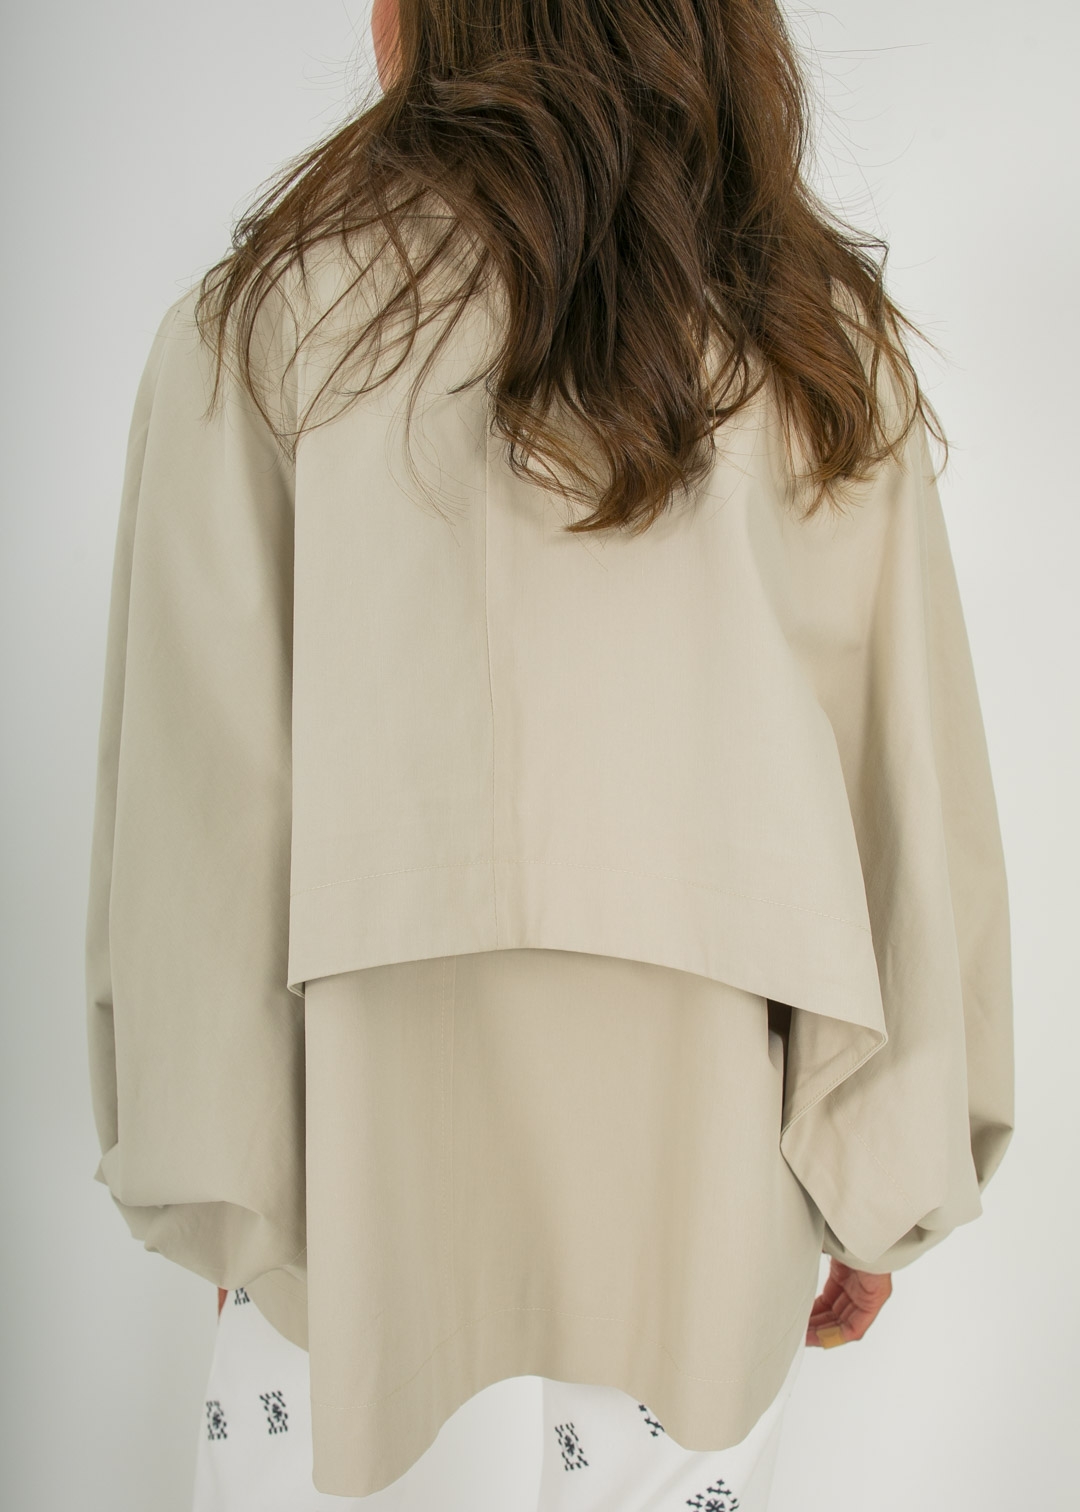 BEIGE CAPE STYLE TRENCH COAT